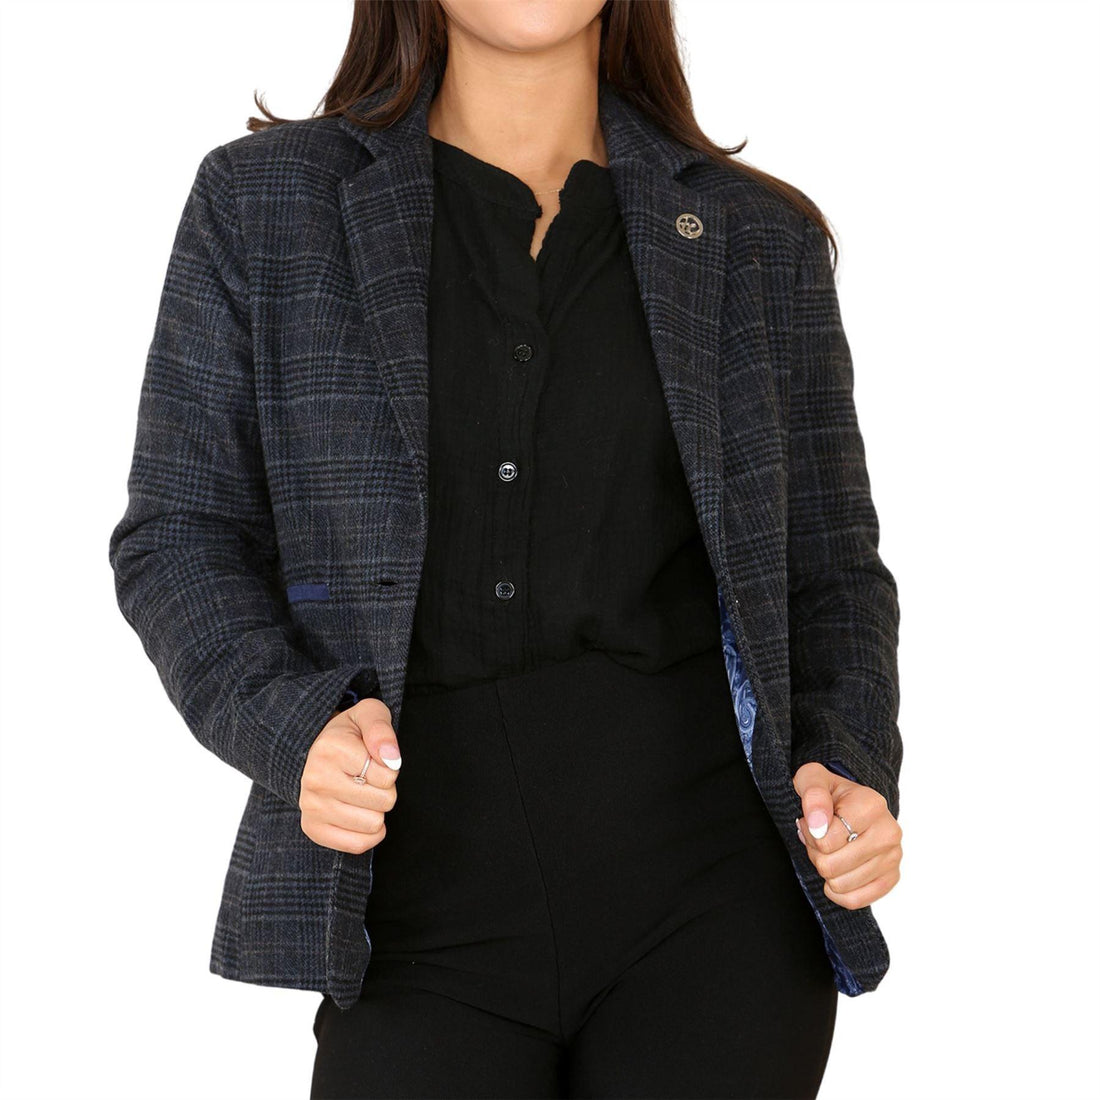 Womens Tweed Check Waistcoat Blazer Suit Navy Blue Classic Vintage Elboy Patch 1920s - Knighthood Store